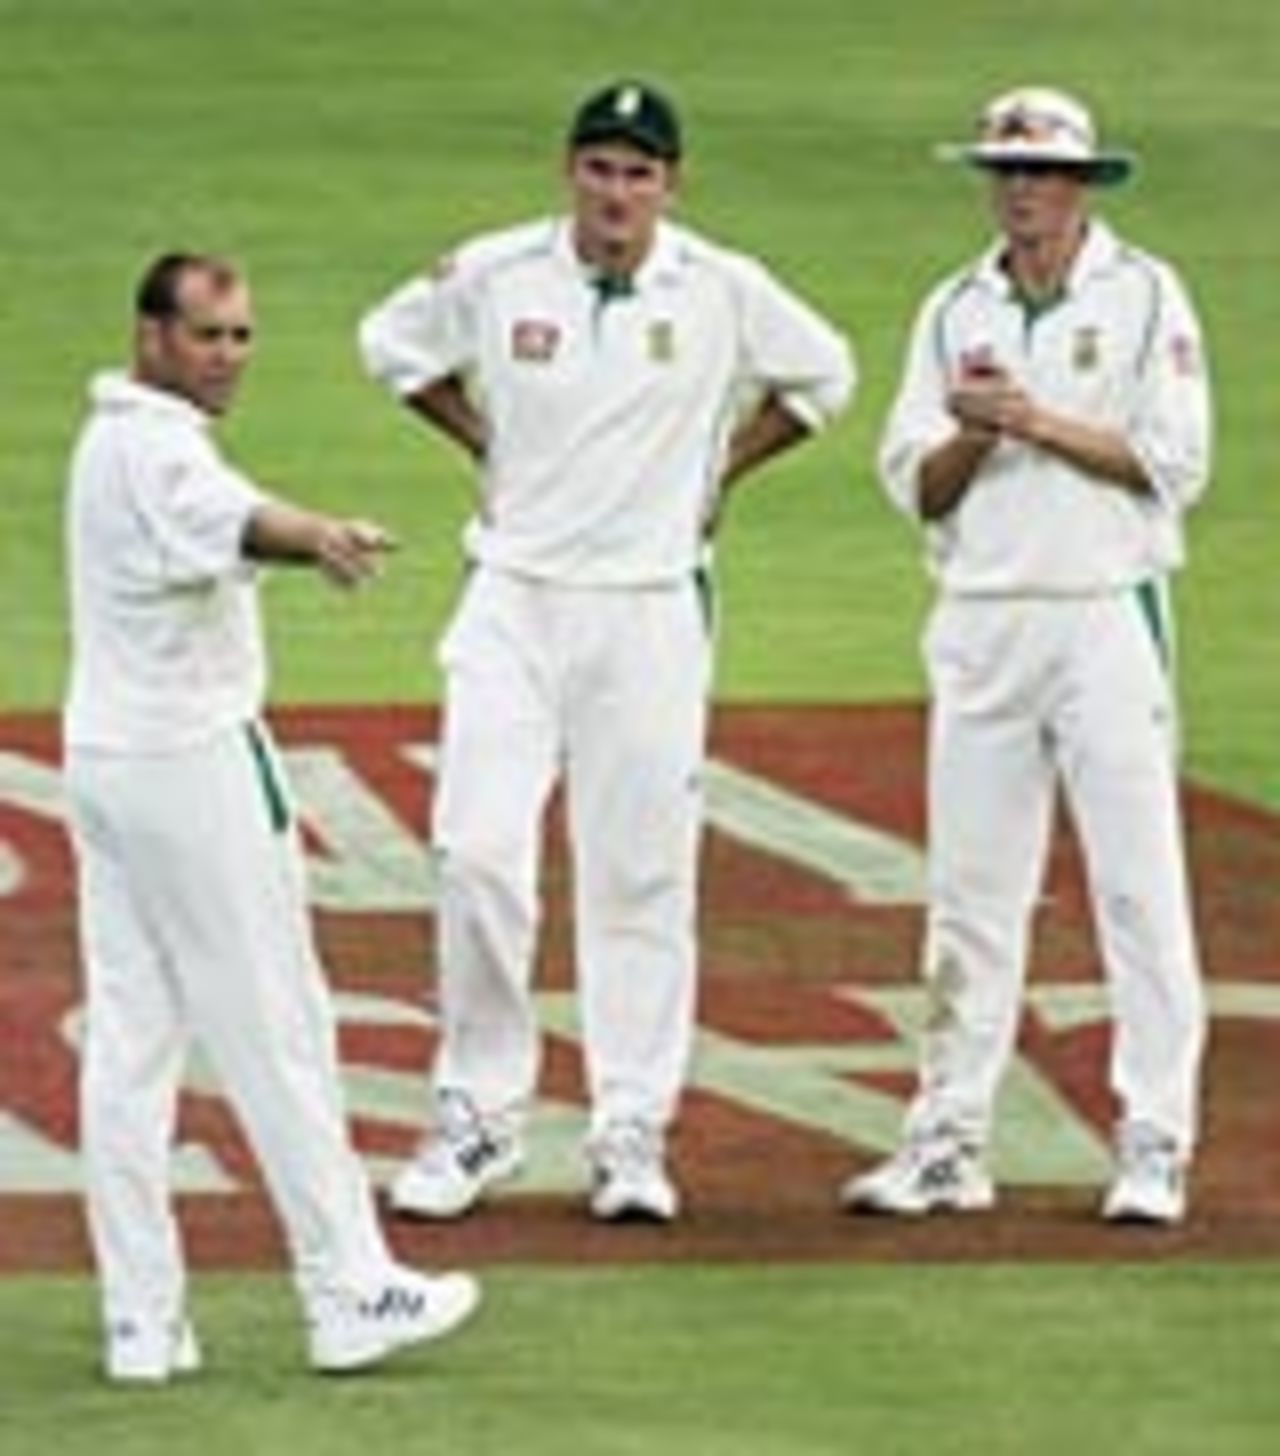 Jacques Kallis, Graeme Smith and Shaun Pollock, South Africa v England, 4th Test, The Wanderers, January 14, 2005